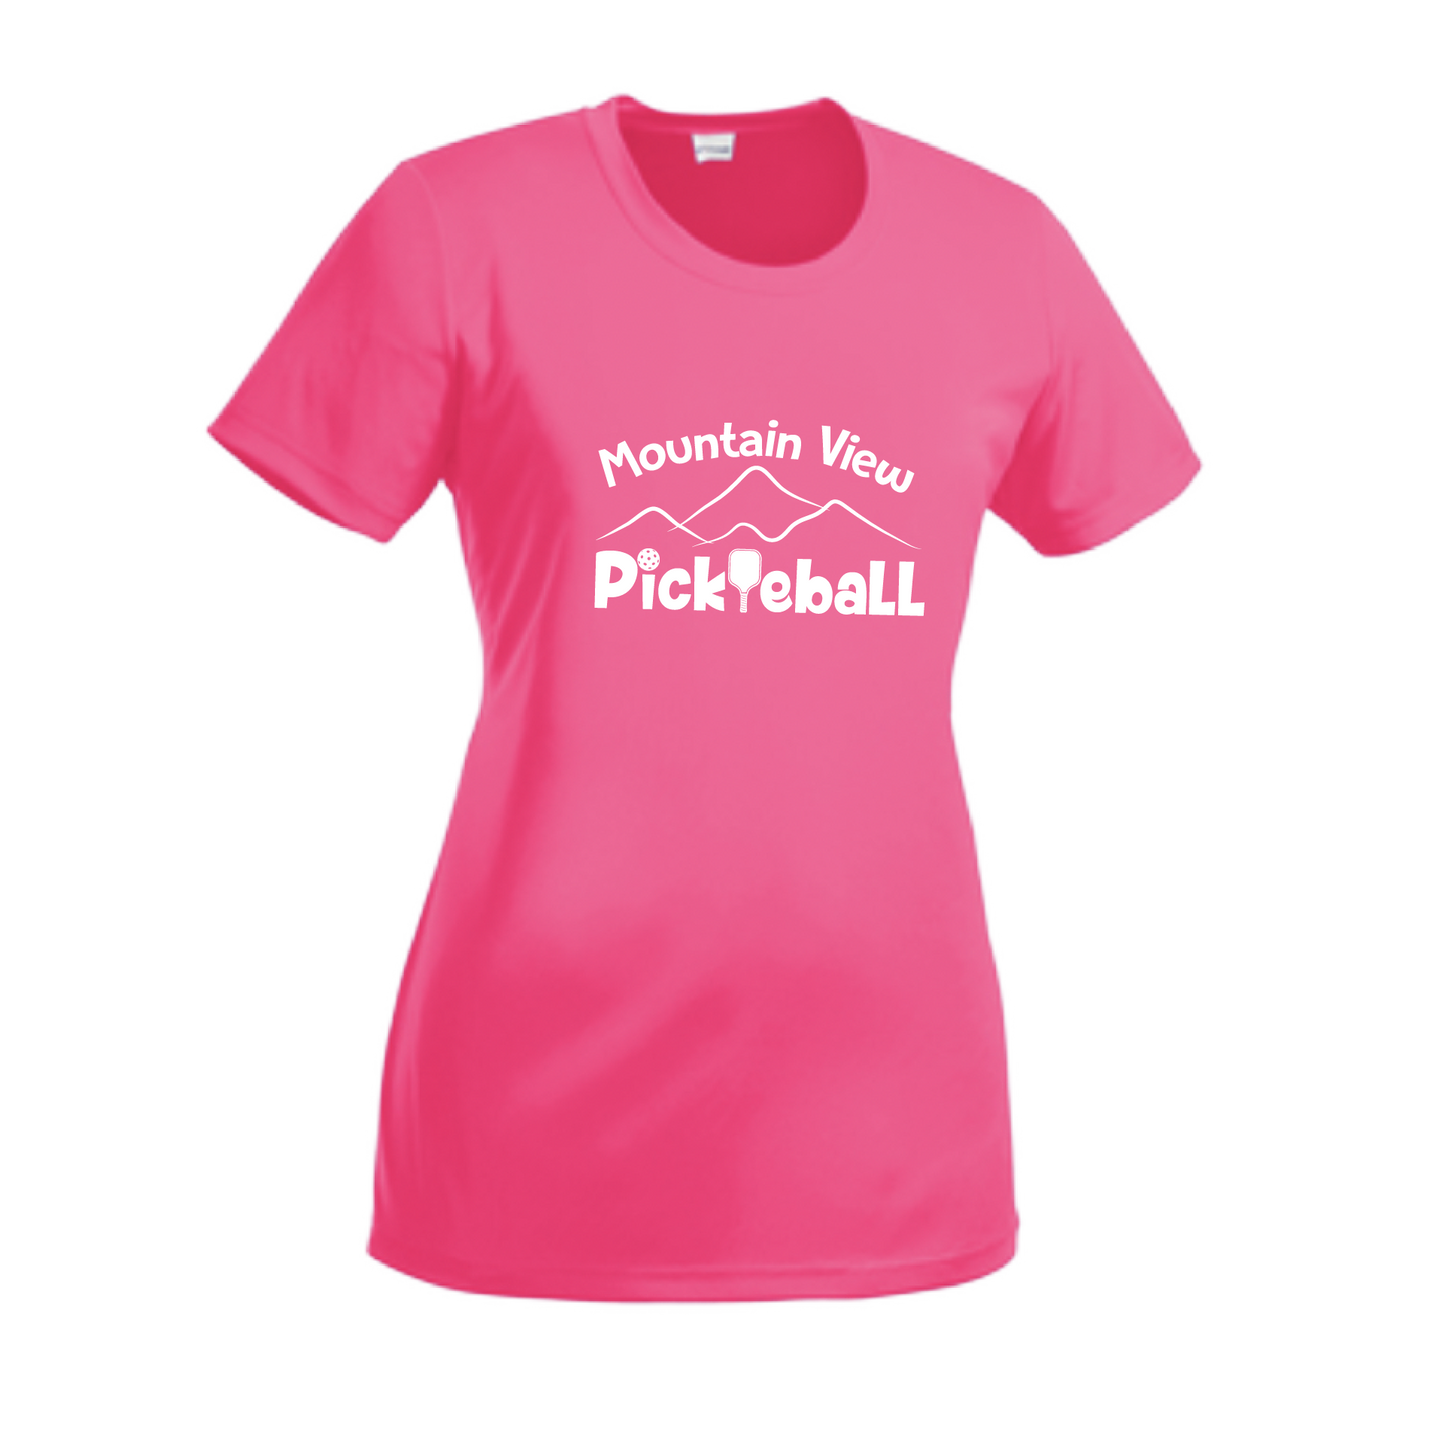 Pickleball Design: Mountain View Pickleball Club  Women's Style: Short-Sleeve Crew-Neck  Turn up the volume in this Women's shirt with its perfect mix of softness and attitude. Material is ultra-comfortable with moisture wicking properties and tri-blend softness. PosiCharge technology locks in color. Highly breathable and lightweight.